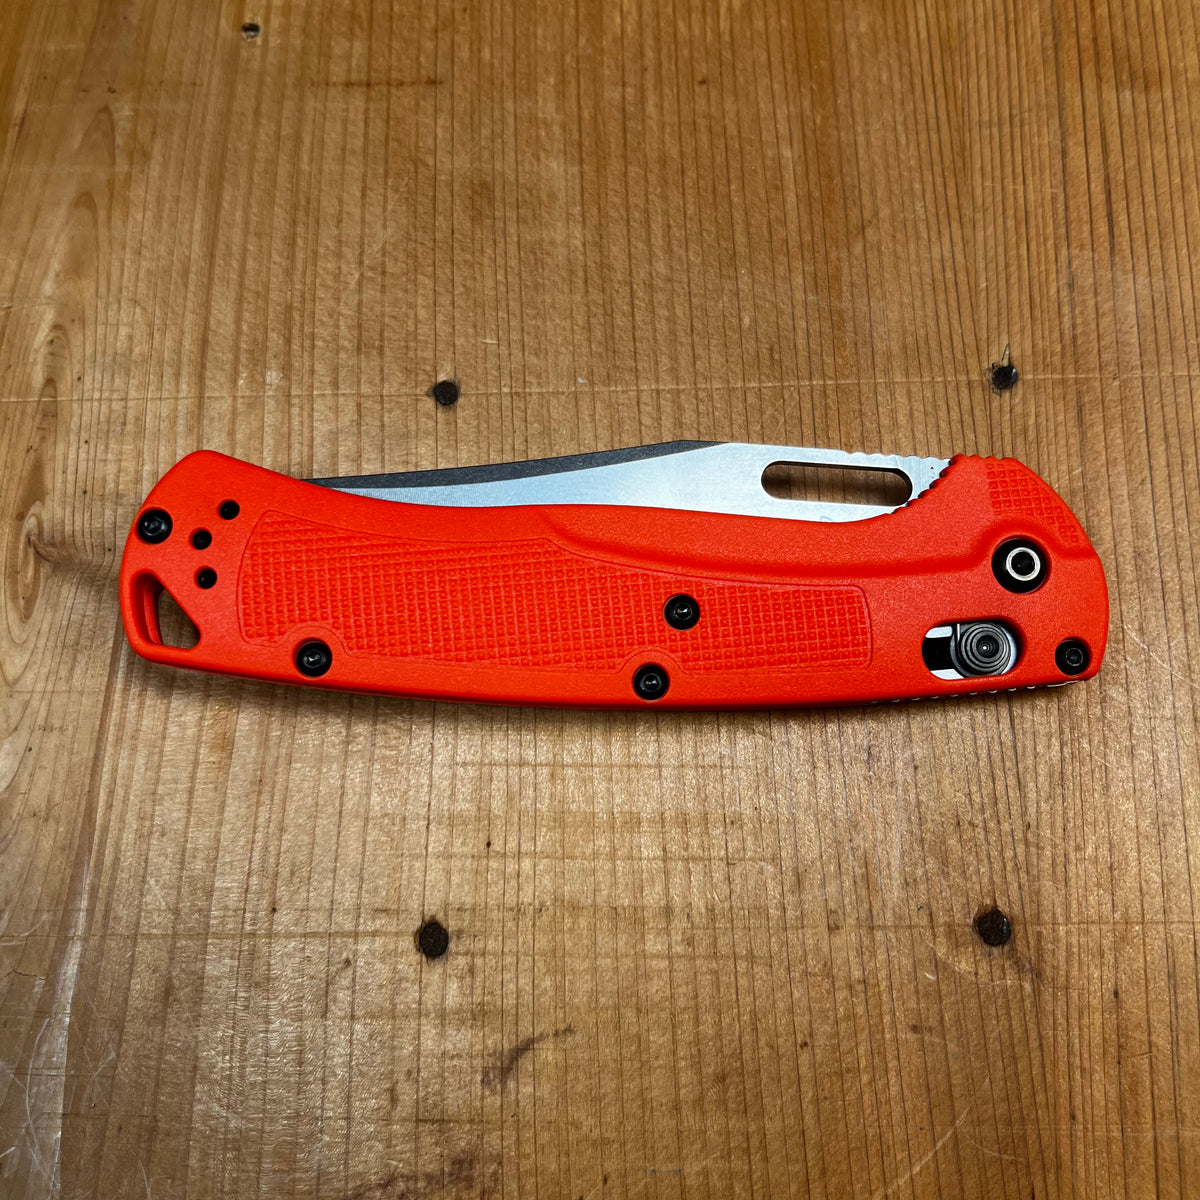 Benchmade 15535 Taggedout Clip Point CPM-154 AXIS Lock Orange Grivory Handle